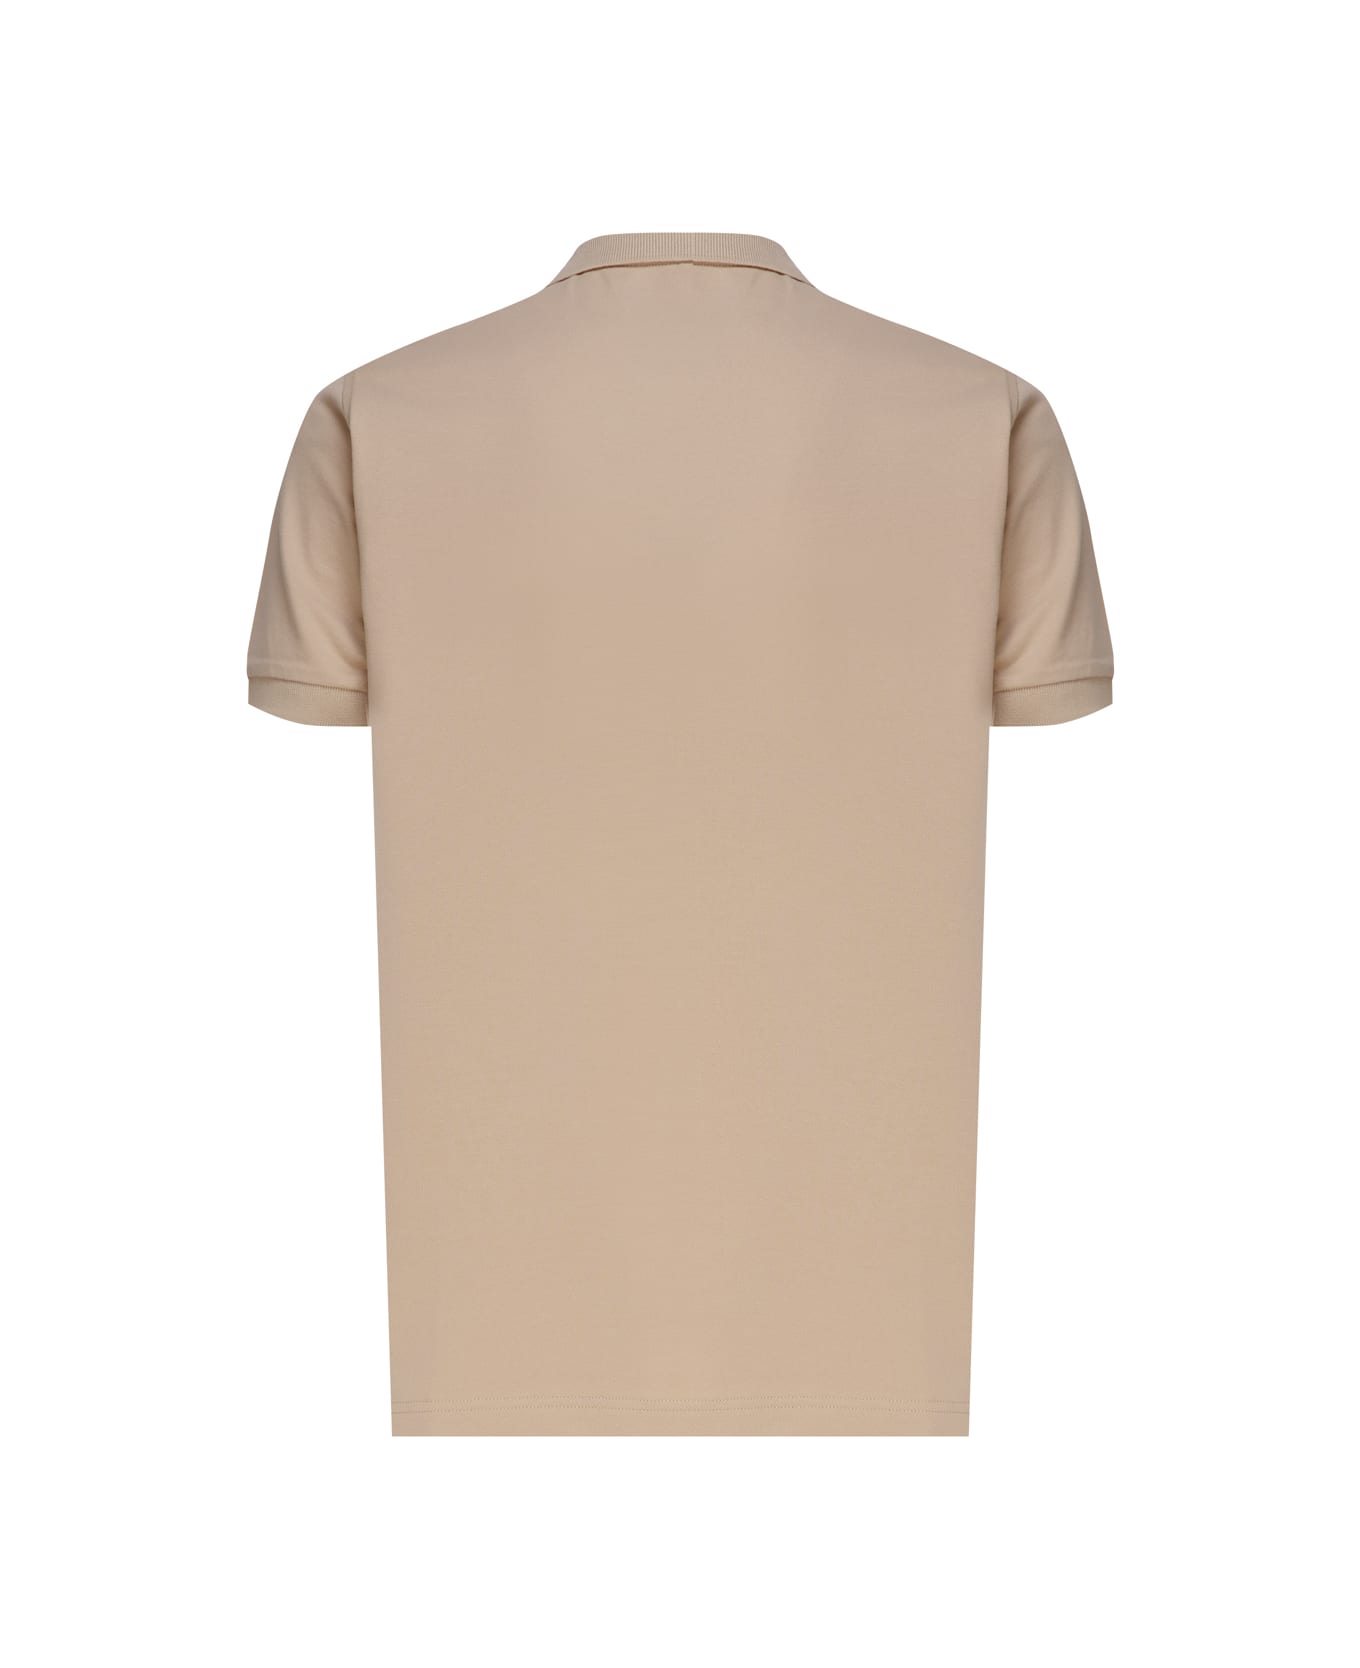 Sun 68 Polo T-shirt In Cotton - Beige ポロシャツ